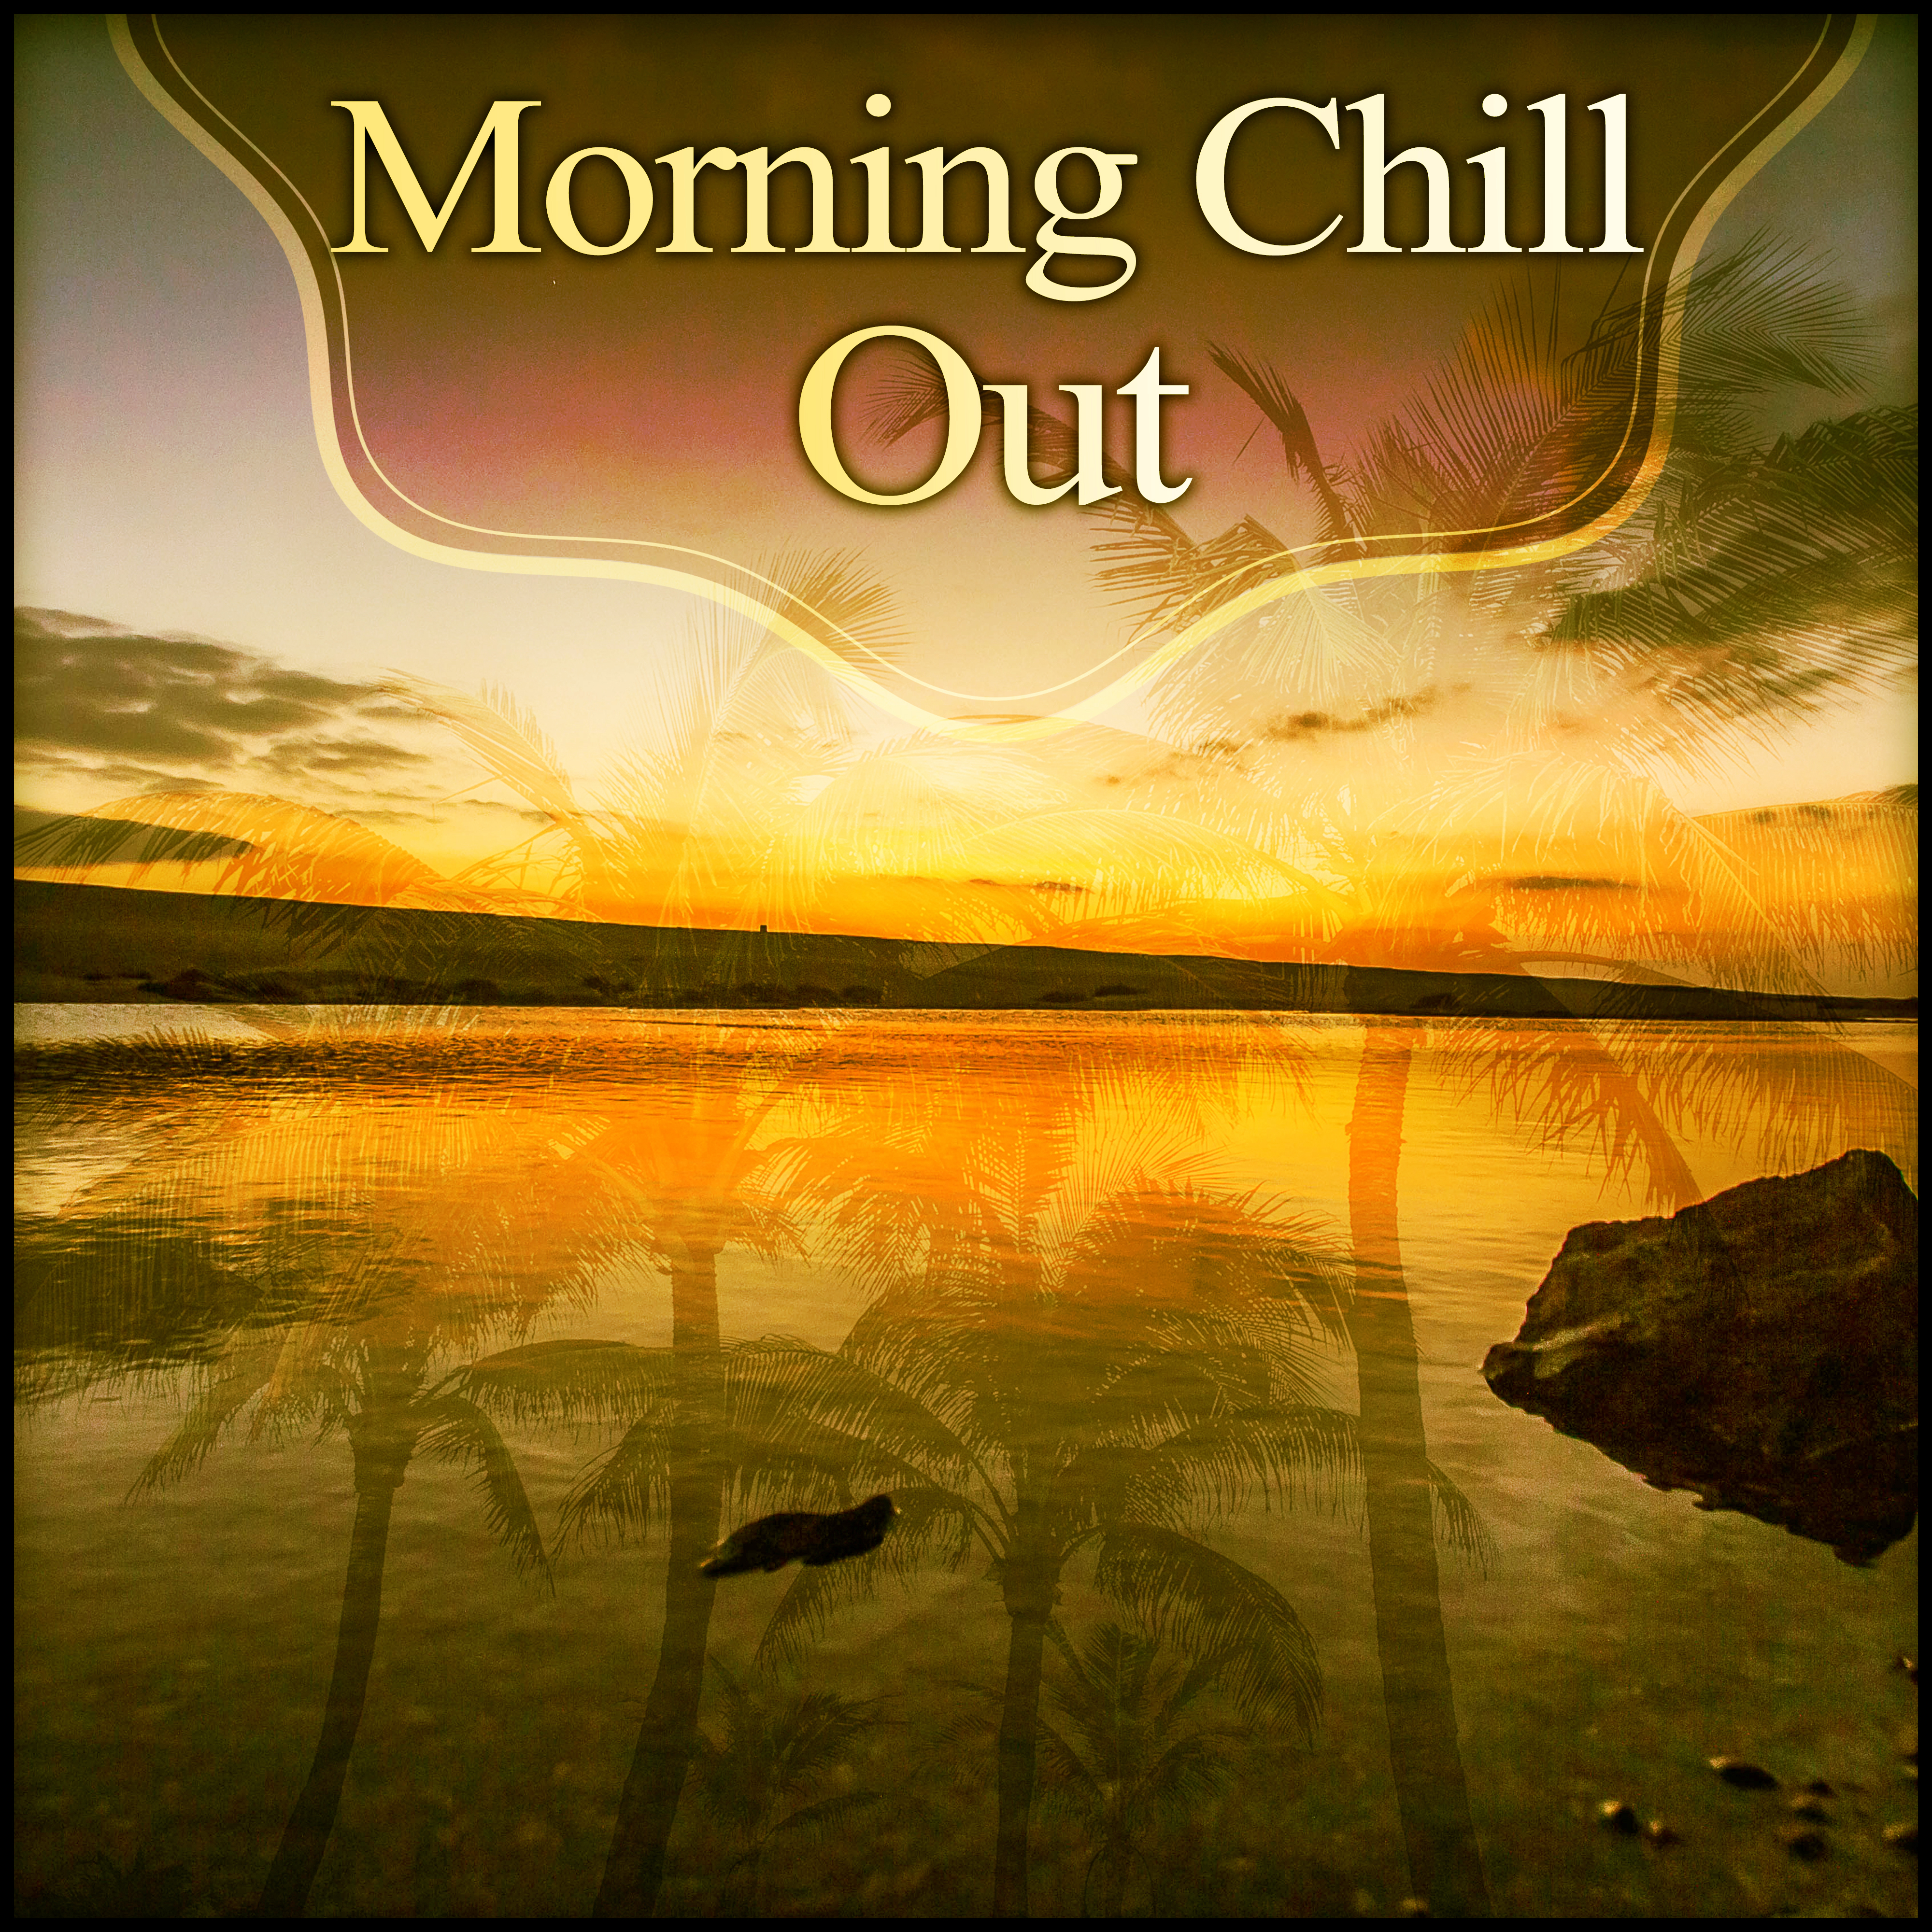 Morning Chill Out - Good Morning Chill Out Music, First Sun, Sun Salutation, Lounge